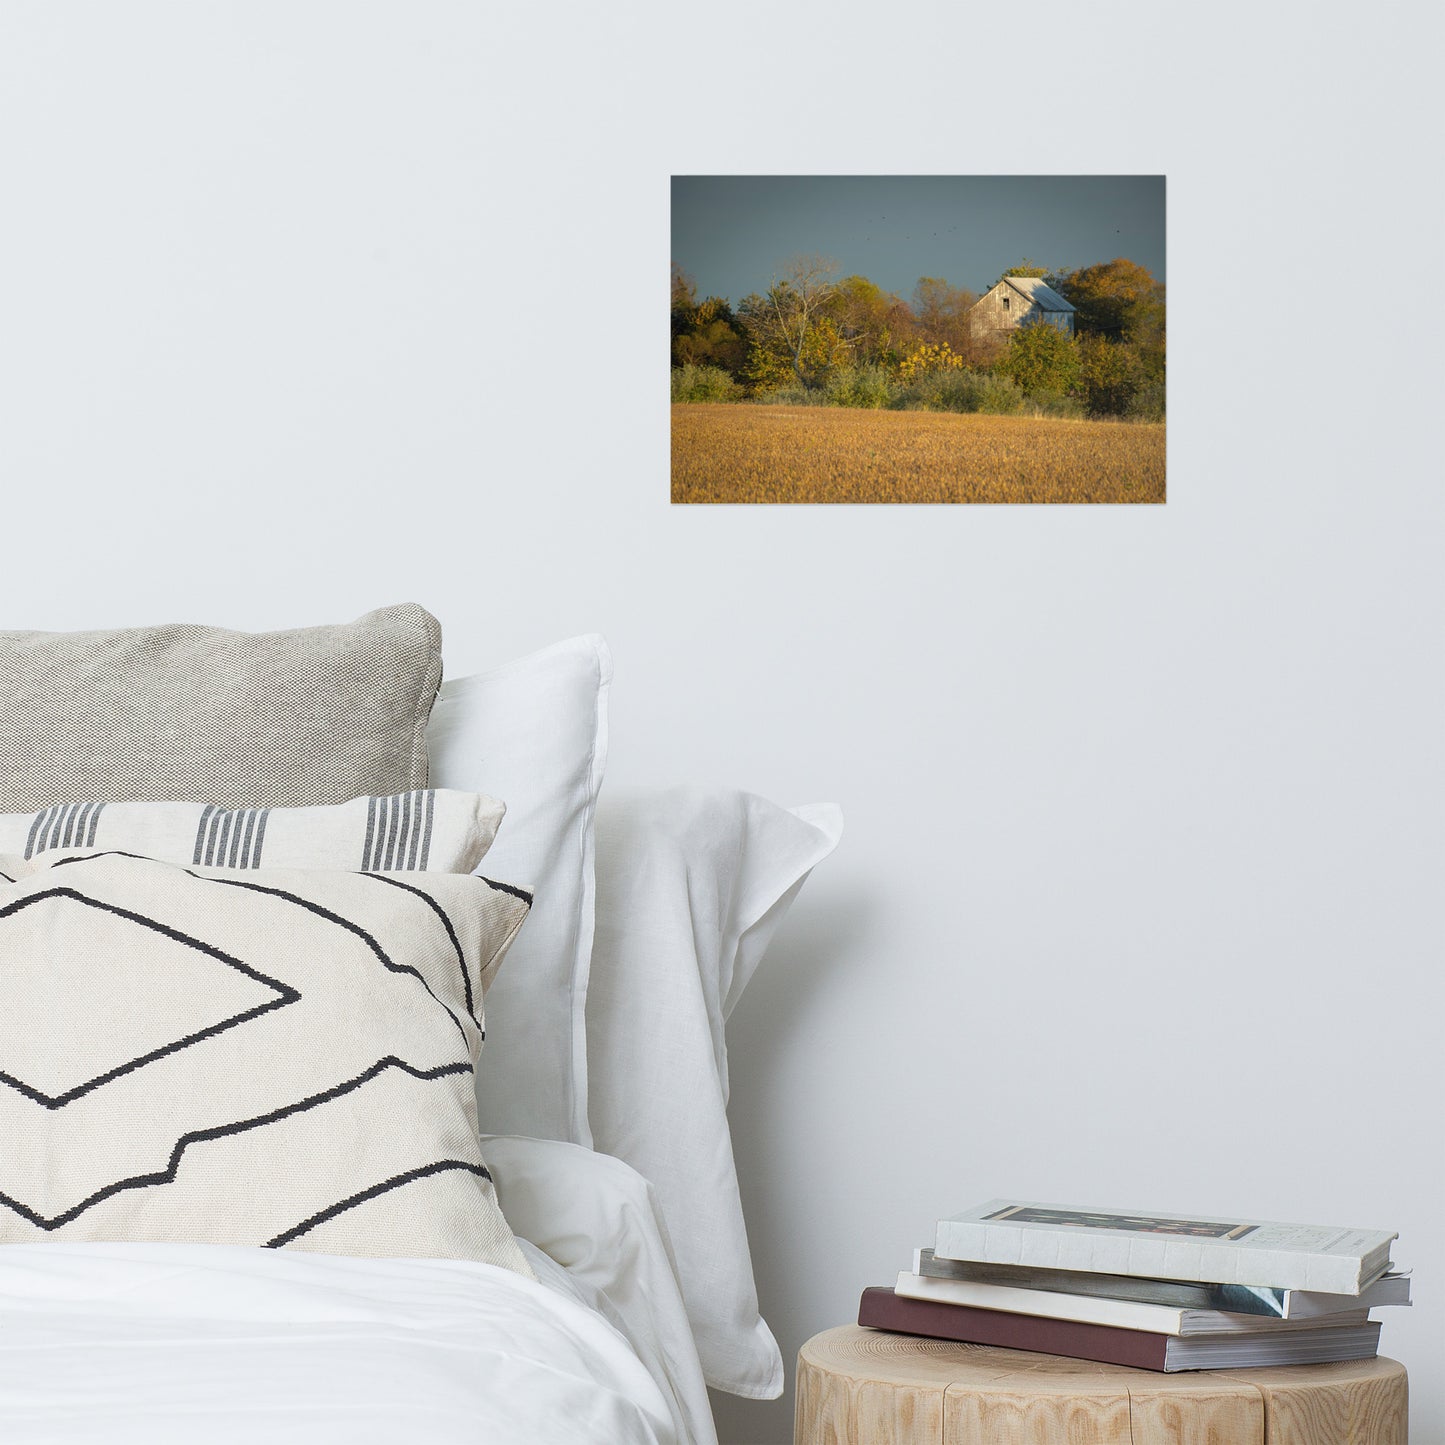 Country Style Wall Art: Abandoned Barn In The Trees Landscape Photo Loose Wall Art Prints